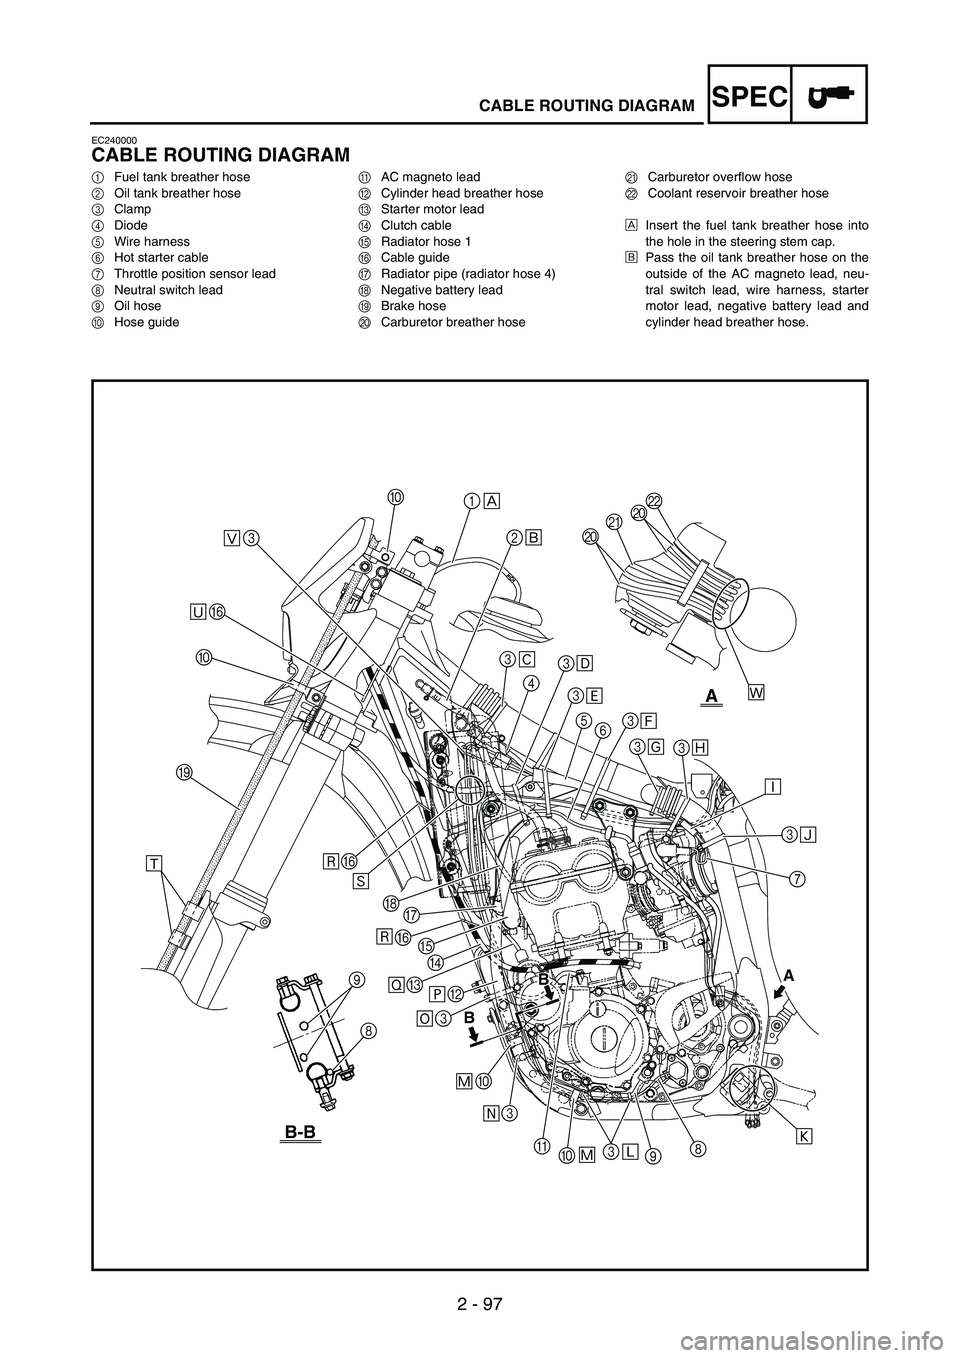 YAMAHA WR 250F 2004  Betriebsanleitungen (in German) SPEC
2 - 97
CABLE ROUTING DIAGRAM
EC240000
CABLE ROUTING DIAGRAM
1Fuel tank breather hose
2Oil tank breather hose
3Clamp
4Diode
5Wire harness
6Hot starter cable
7Throttle position sensor lead
8Neutral